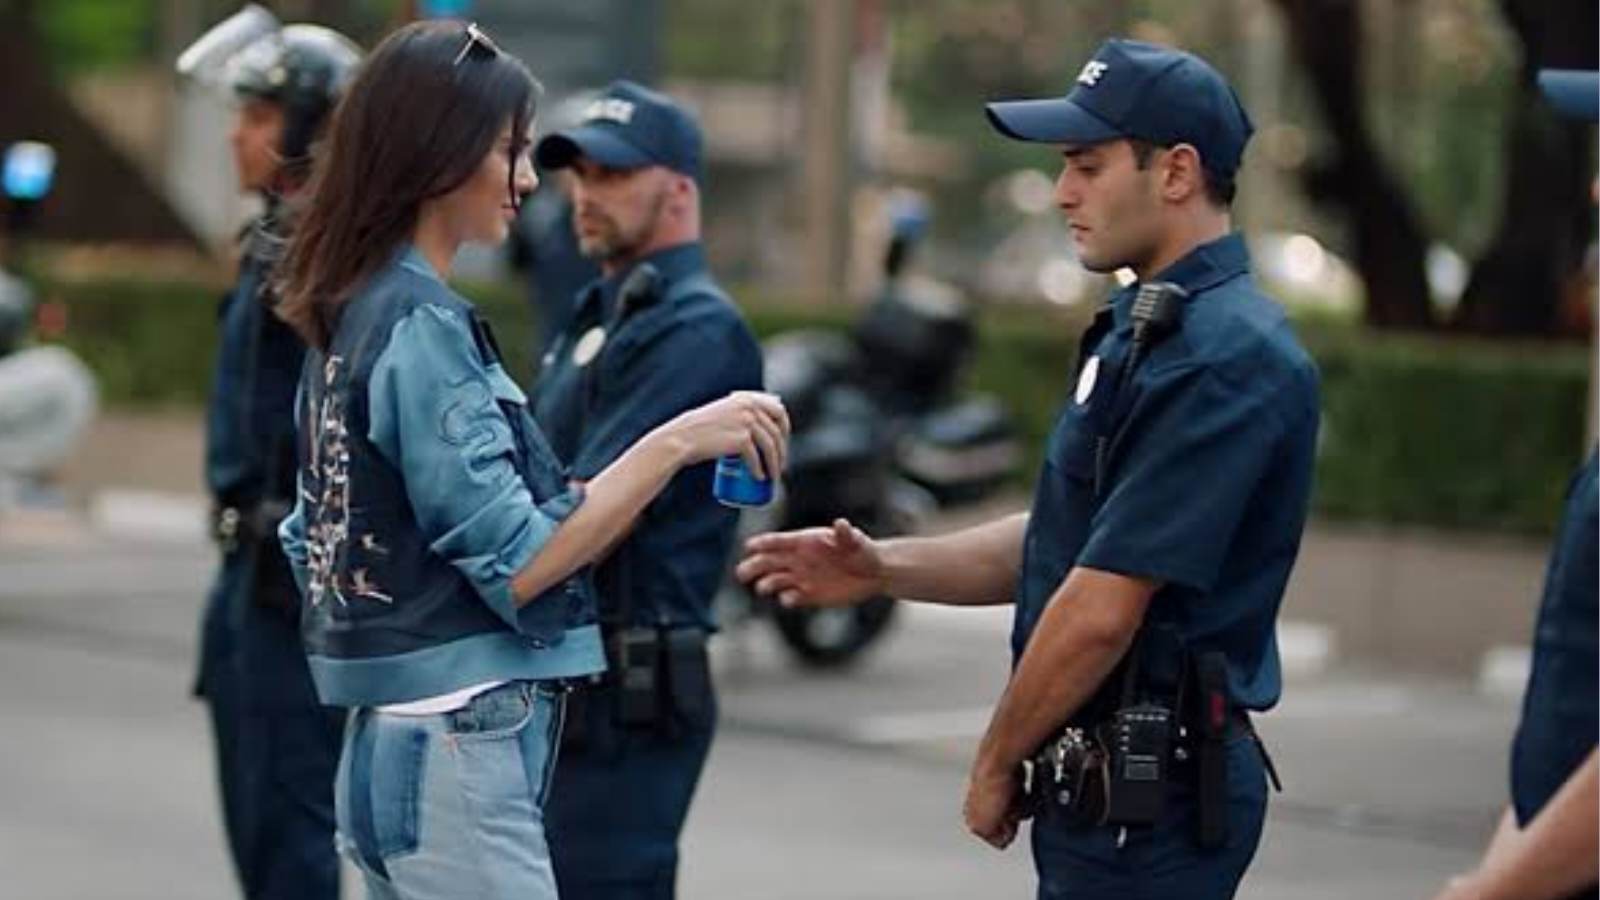 A snippet from the Kendall Jenner Pepsi commercial in 2017